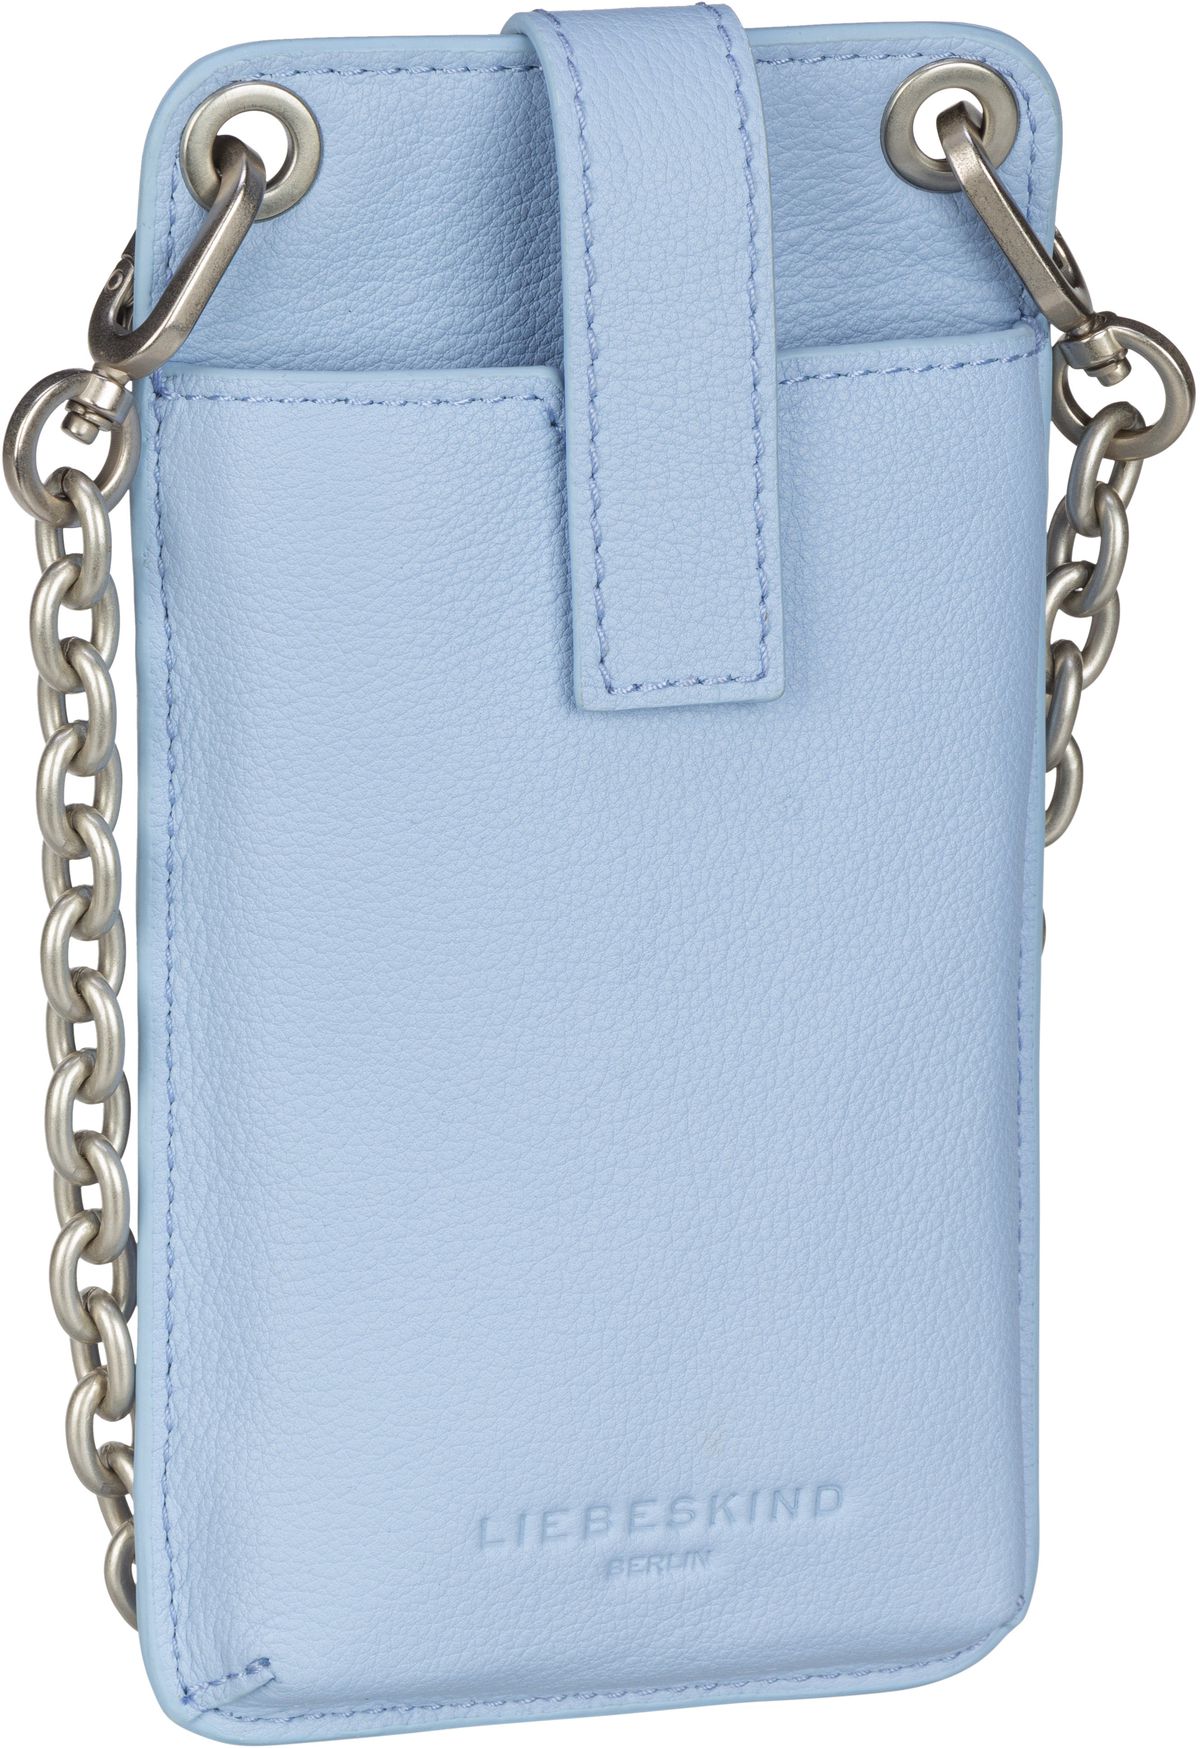 Liebeskind Berlin Basic Mobile Pouch - Clear Sky